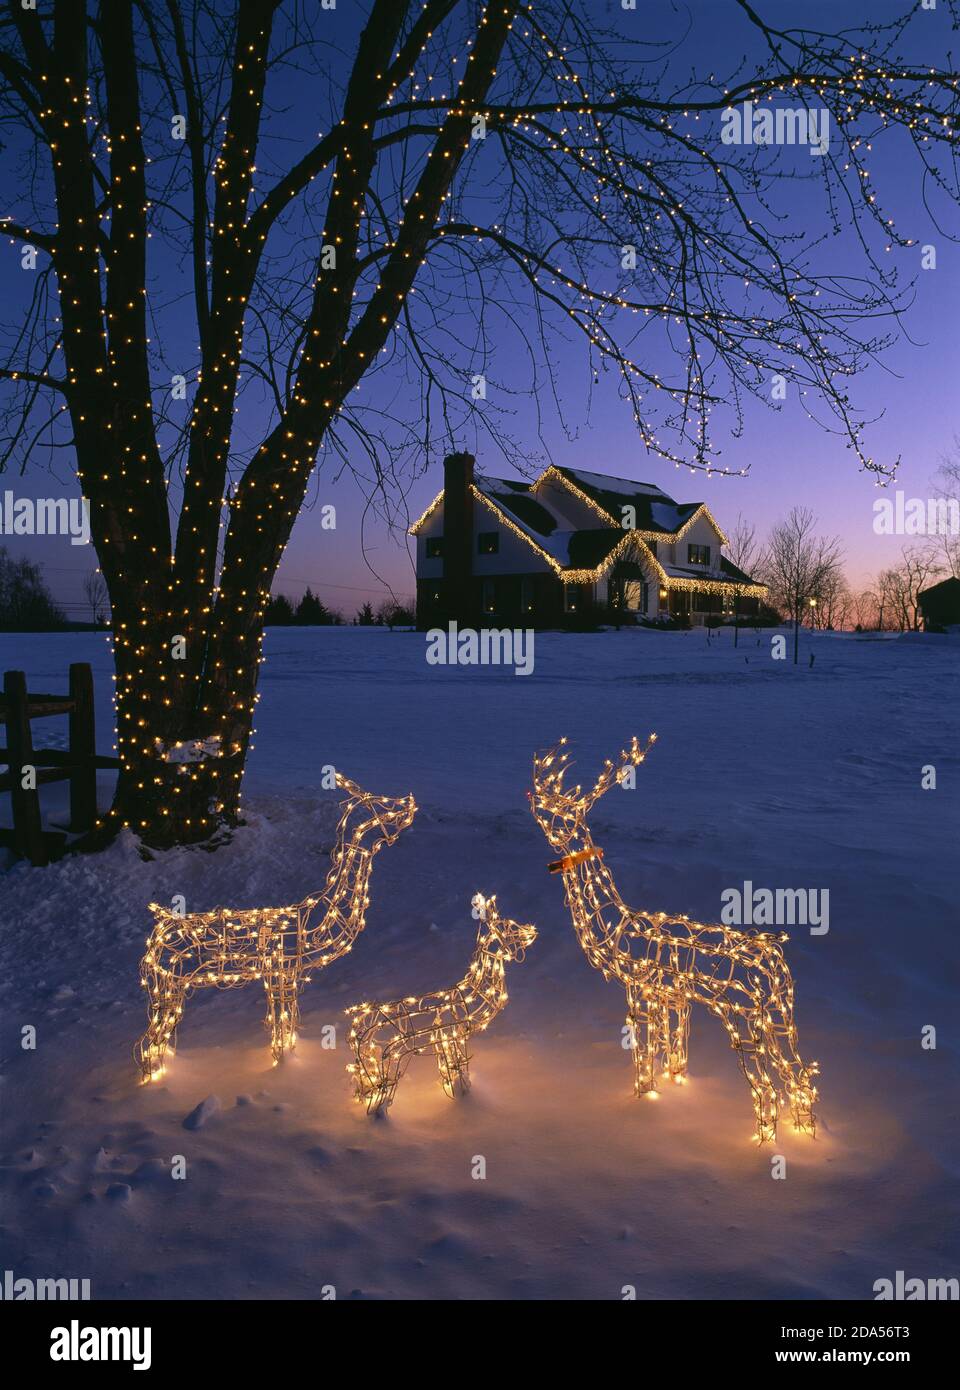 LIGHTED DECORATIVE DEER AND TREE ON SNOW COVERED LAWN / HOUSE WITH ICICLE LIGHTS IN BACKGROUND / AKRON, PENNSYLVANIA Stock Photo